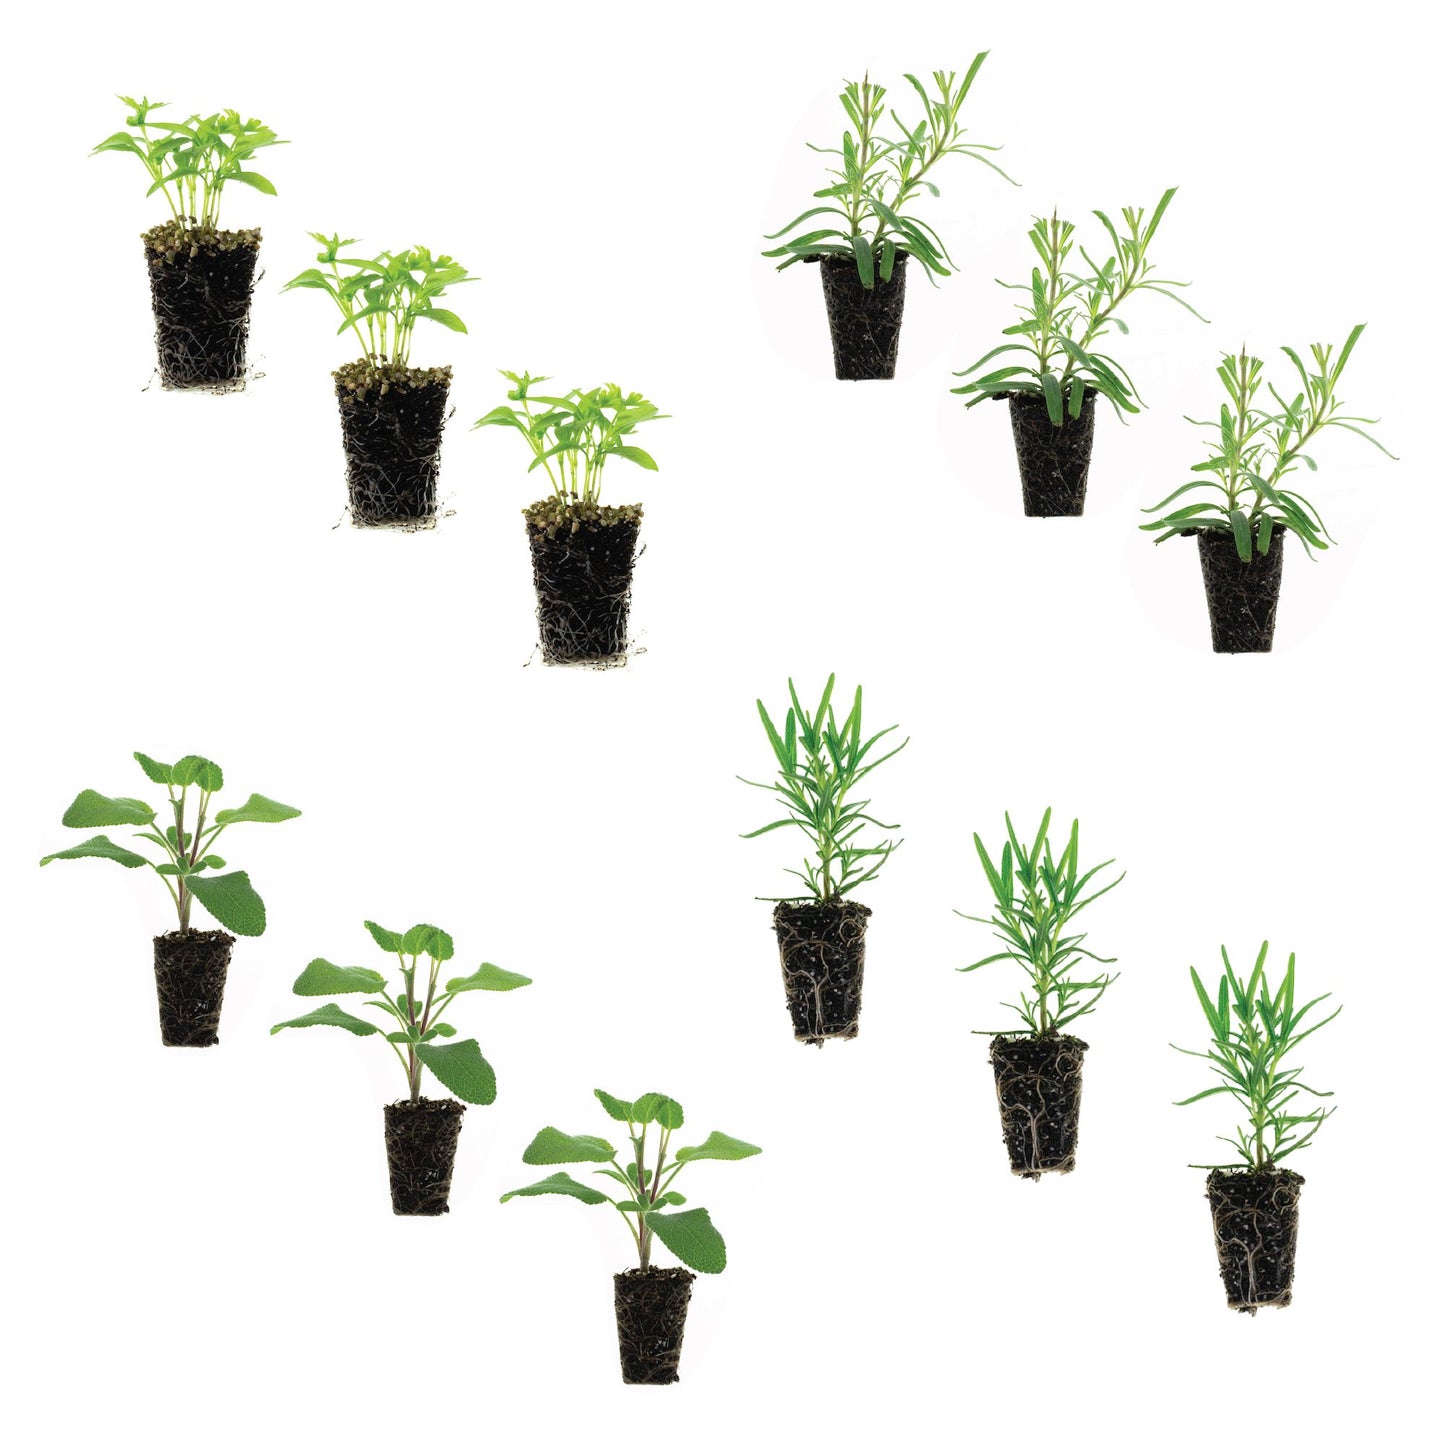 Aromatherapy Herbs Plantlings Kit Live Baby Plants 1-3in., 12-Pack